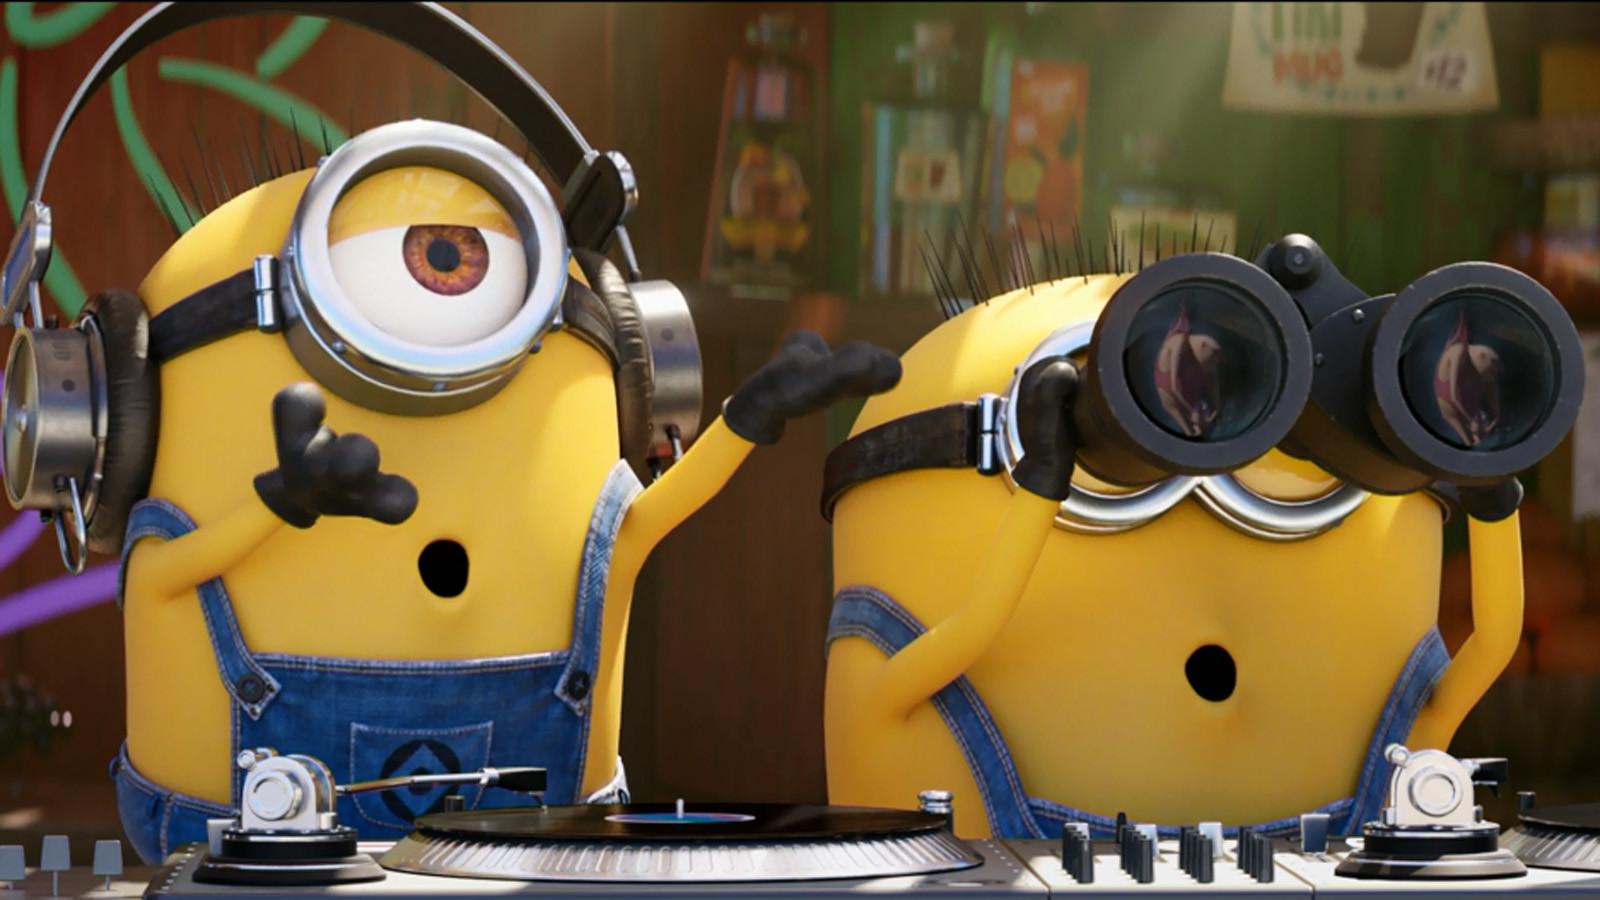 Despicable Me  movie characters 4K wallpaper download